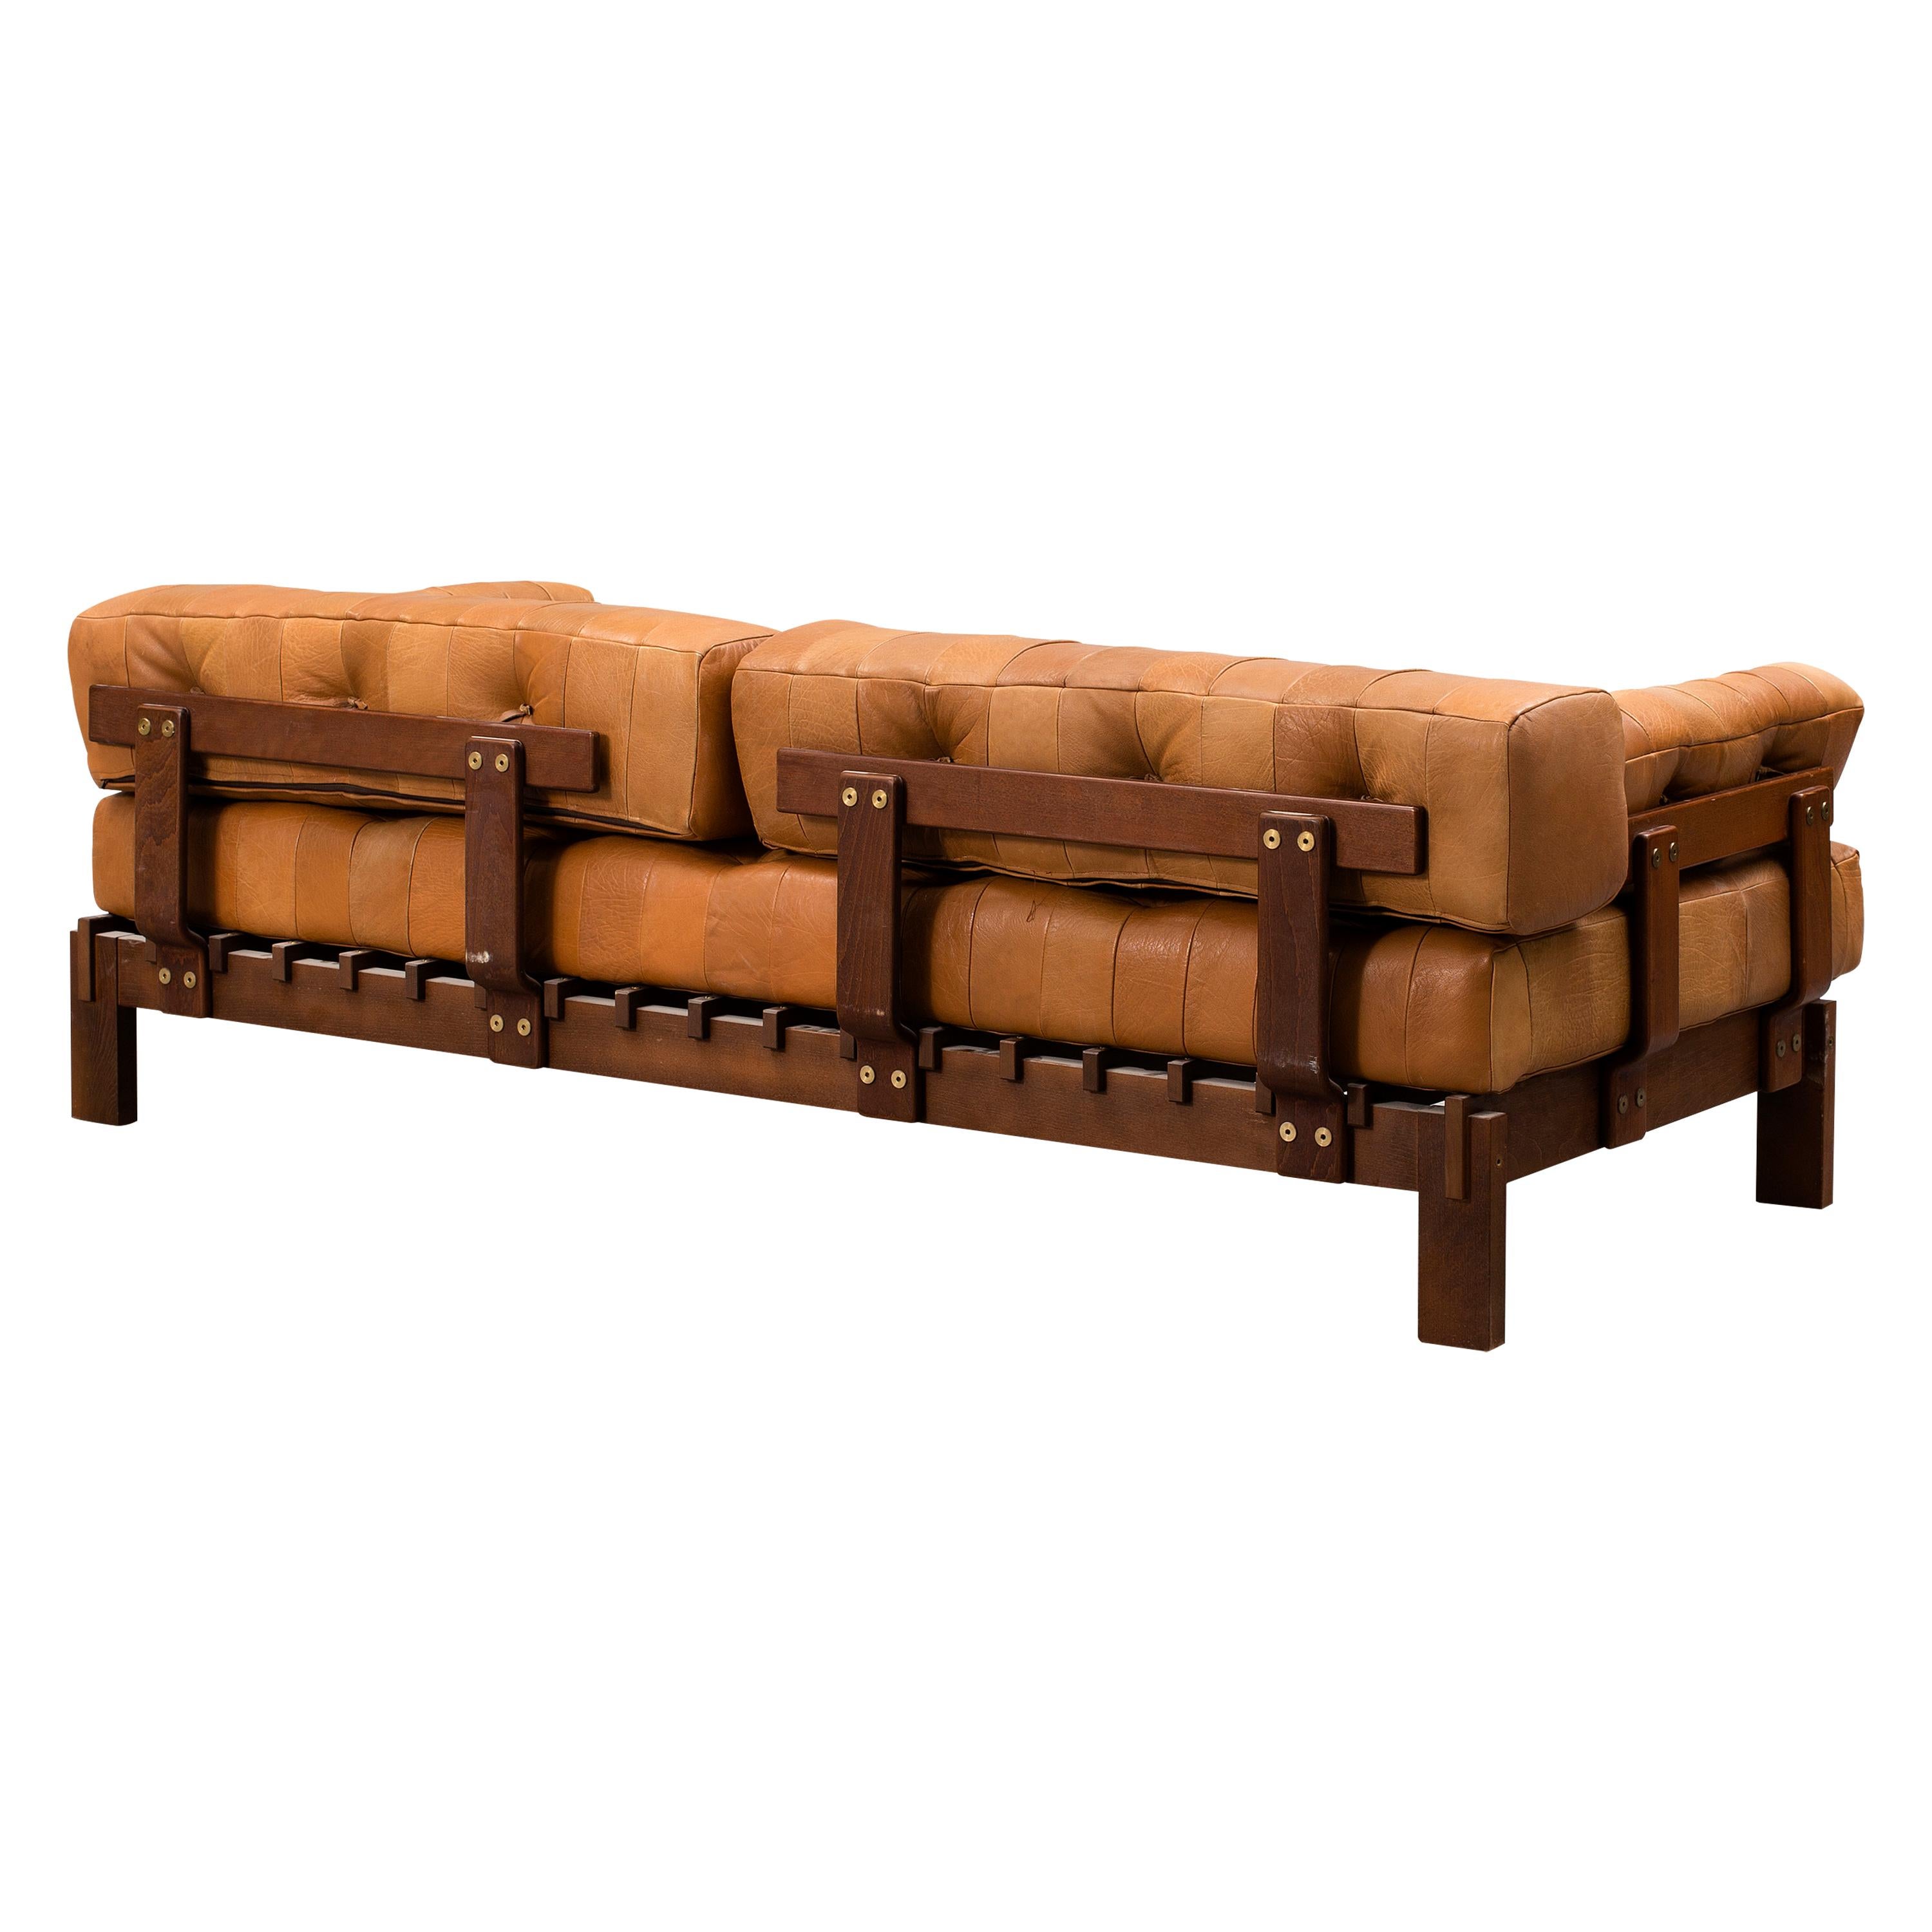 1970s vintage deep-seated sofa with its original smooth leather upholstery. In the style of De Sede - Model DS-80. The leather patchwork has slightly different tones all over with high quality stitching. The leather is in really good condition,